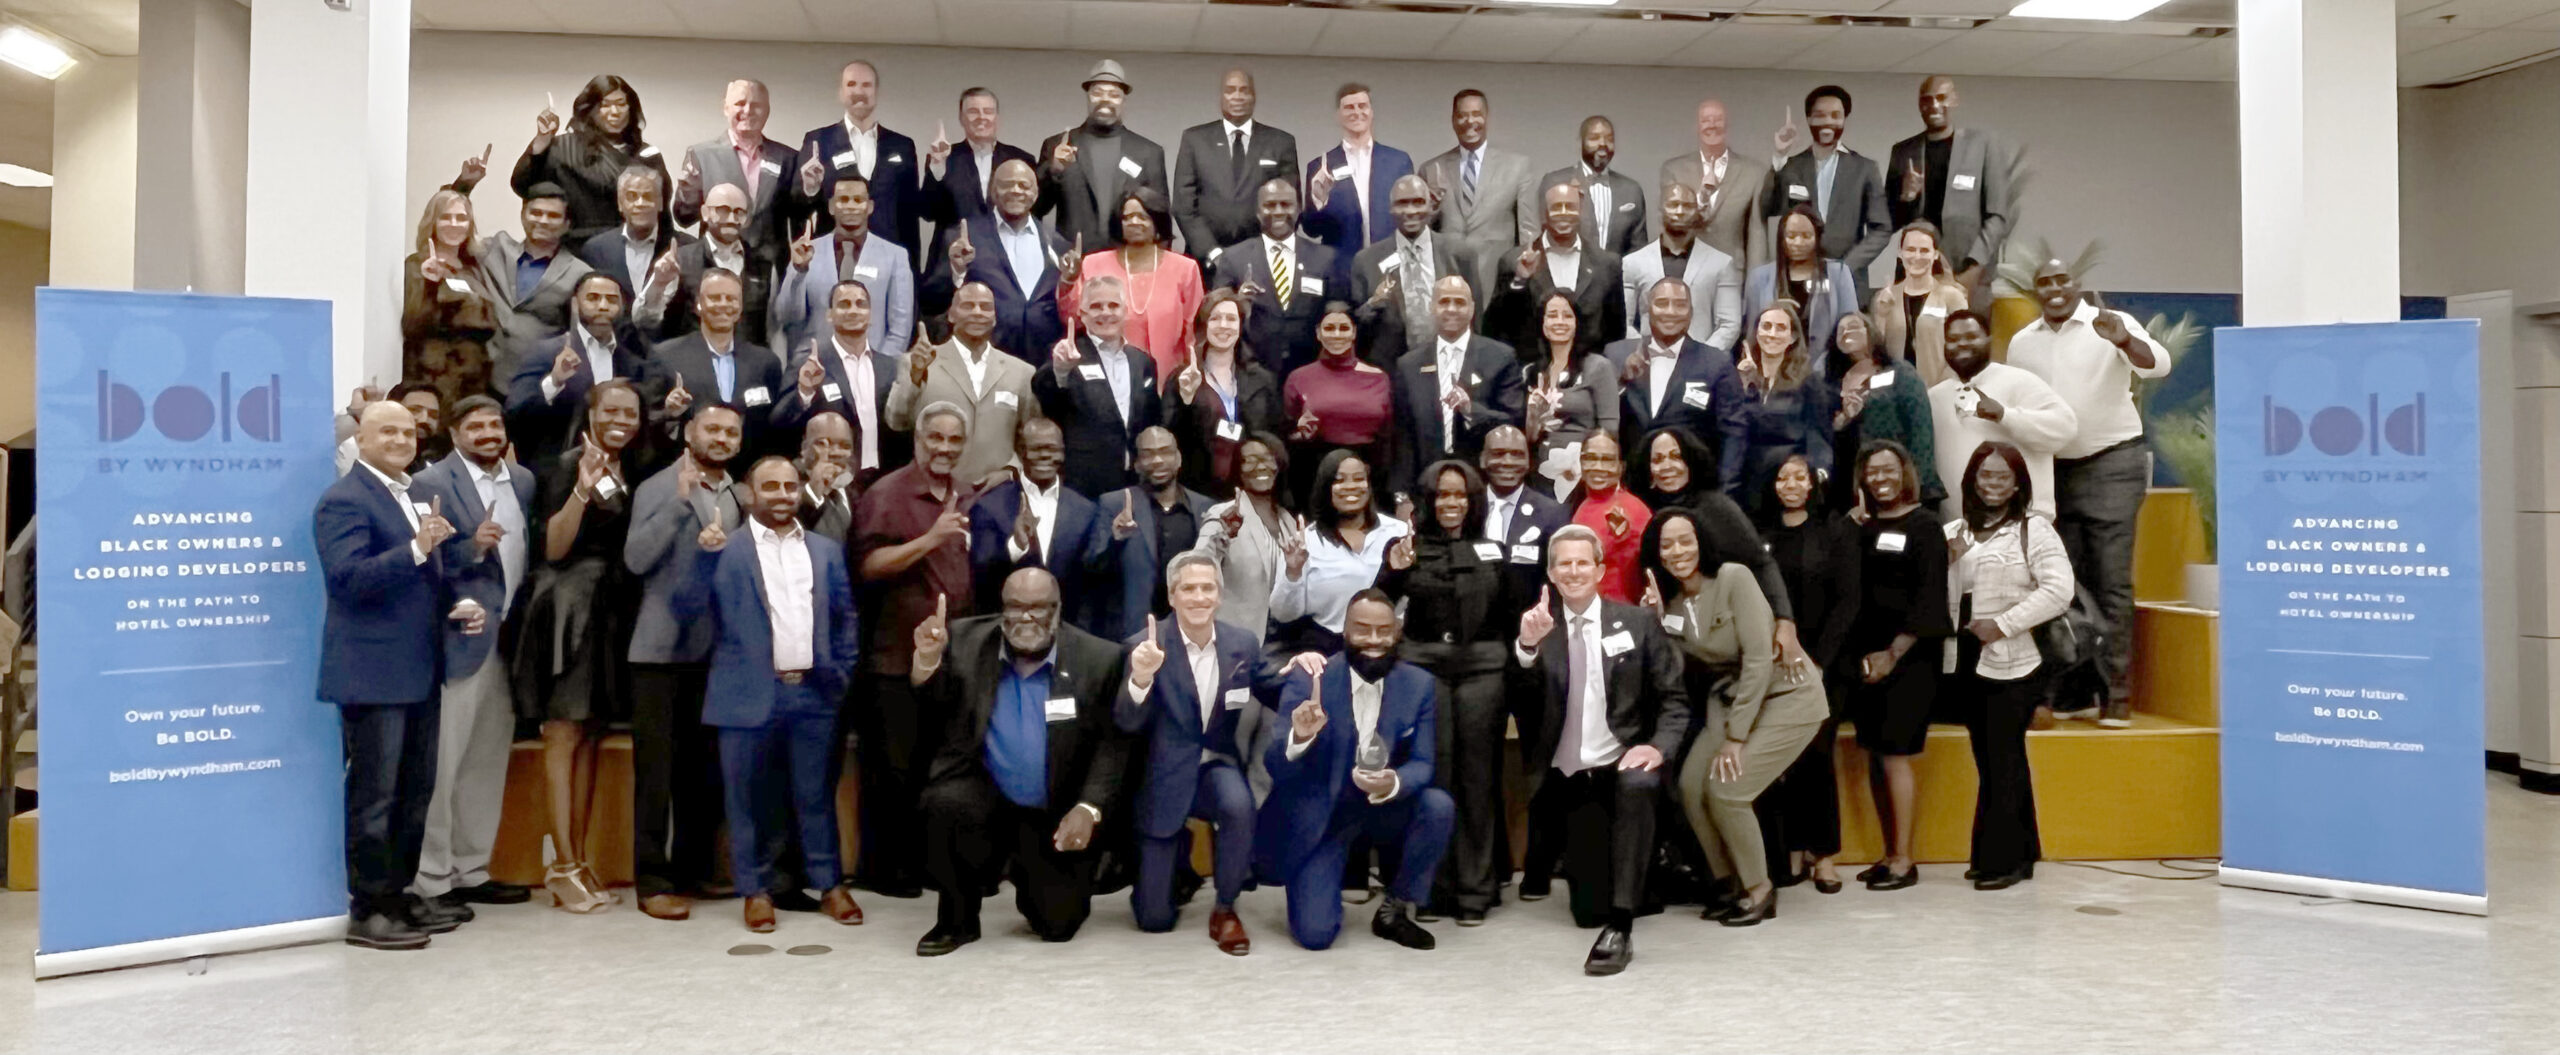 BOLD By Wyndham Initiative Aims To Expand Support For Black Entrepreneurs In The Hotel Industry